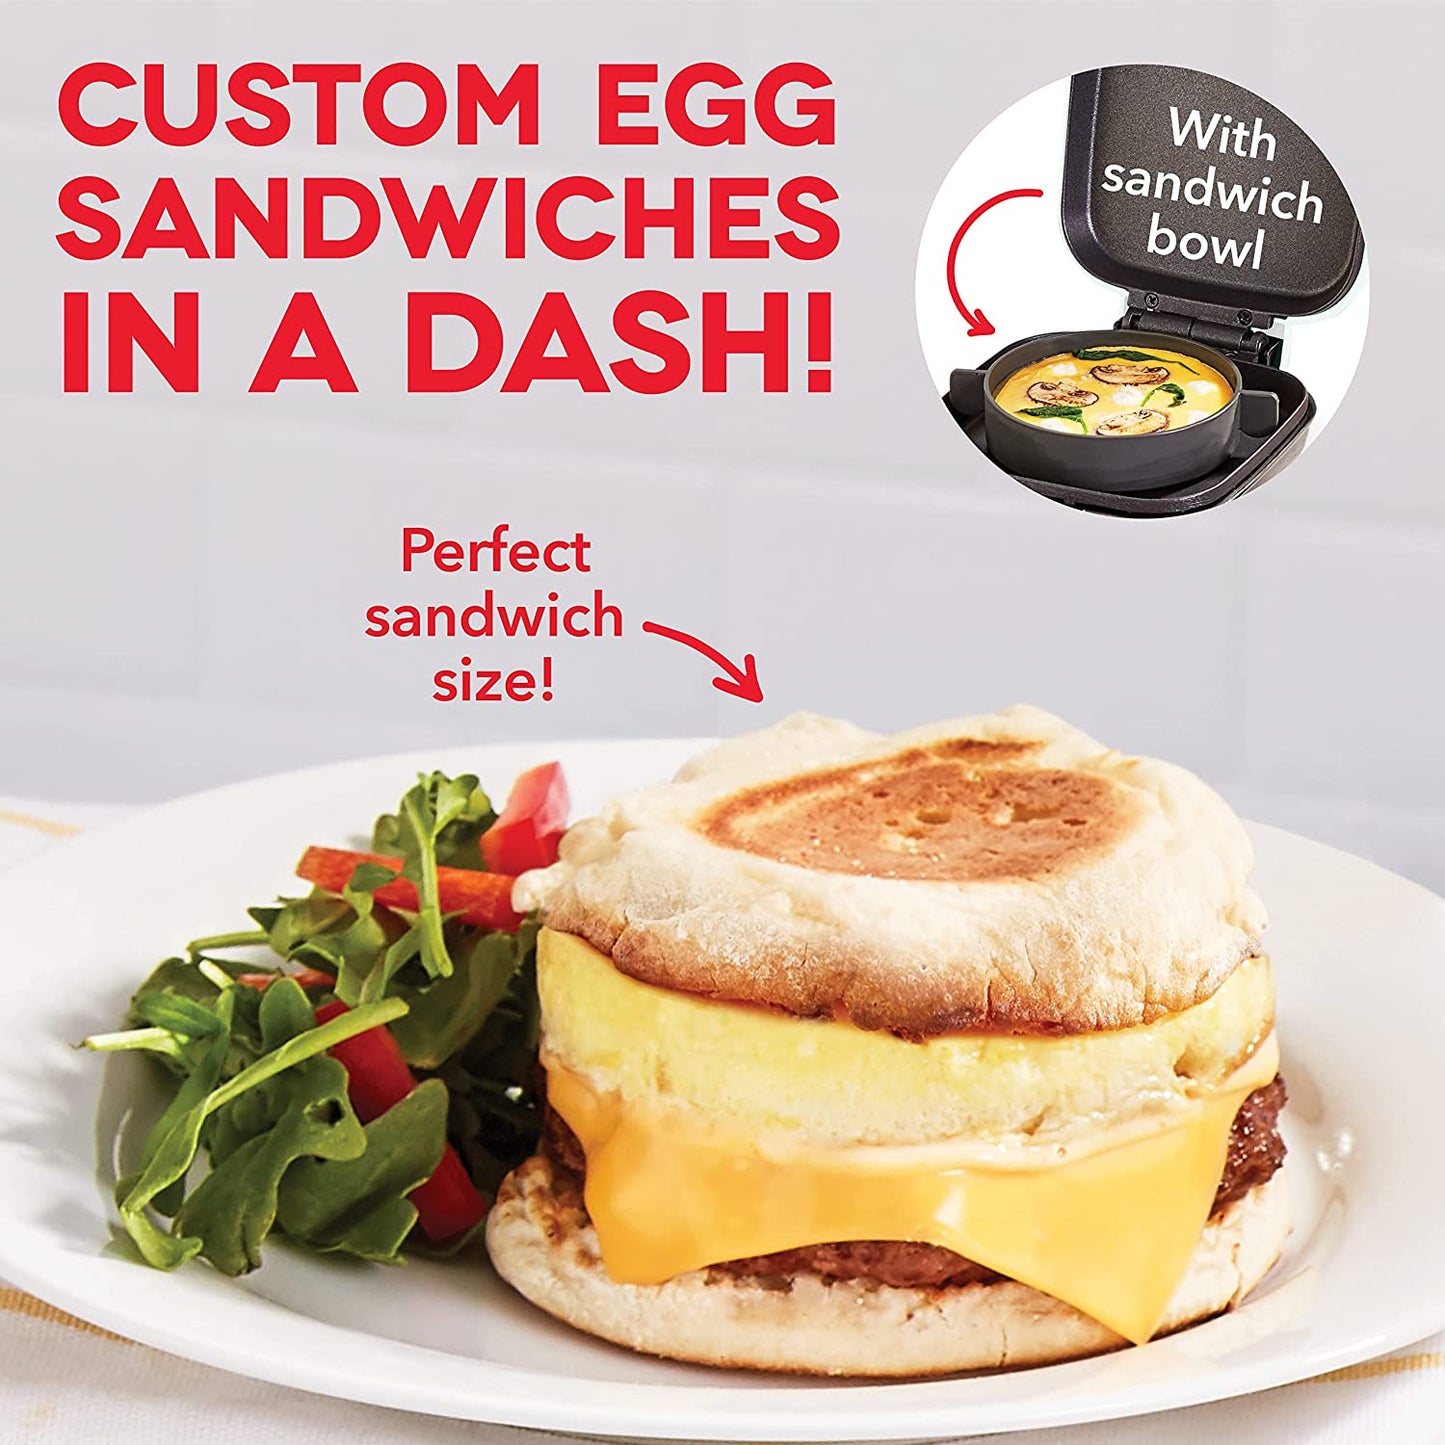 A delicious looking fully cooked egg muffin sandwich on a plate. There is text which says, 'Custom egg sandwiches in a dash.’ There is further text which says, 'With sandwich bowl.’ meaning that the cooker also comes with a silicone sandwich bowl.